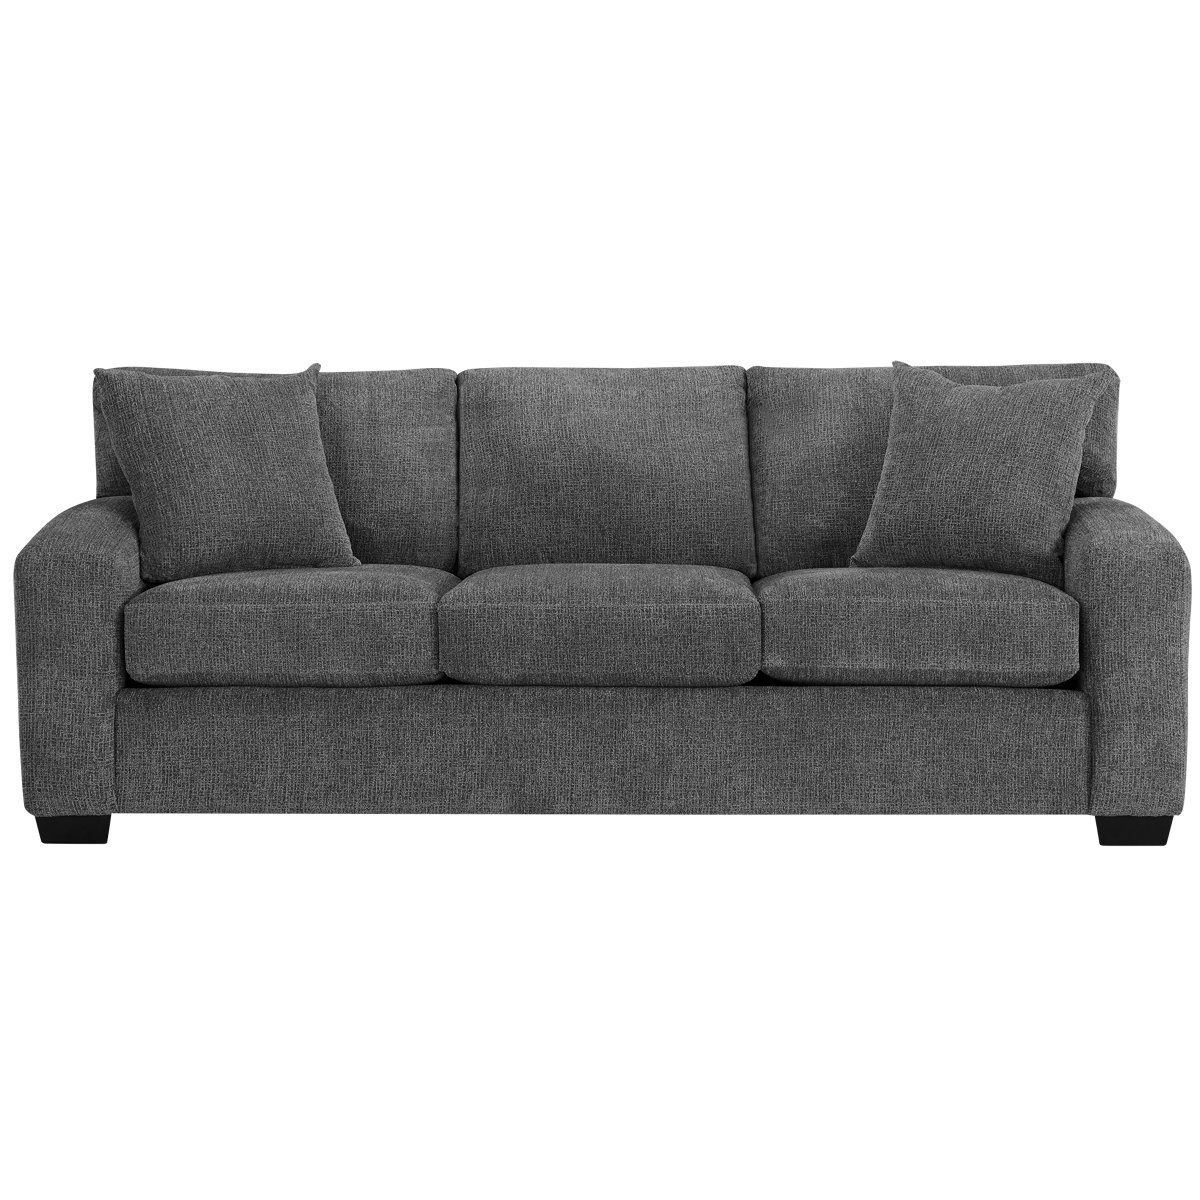 couch. Concept grey leather couch: couch-leather-gray ...